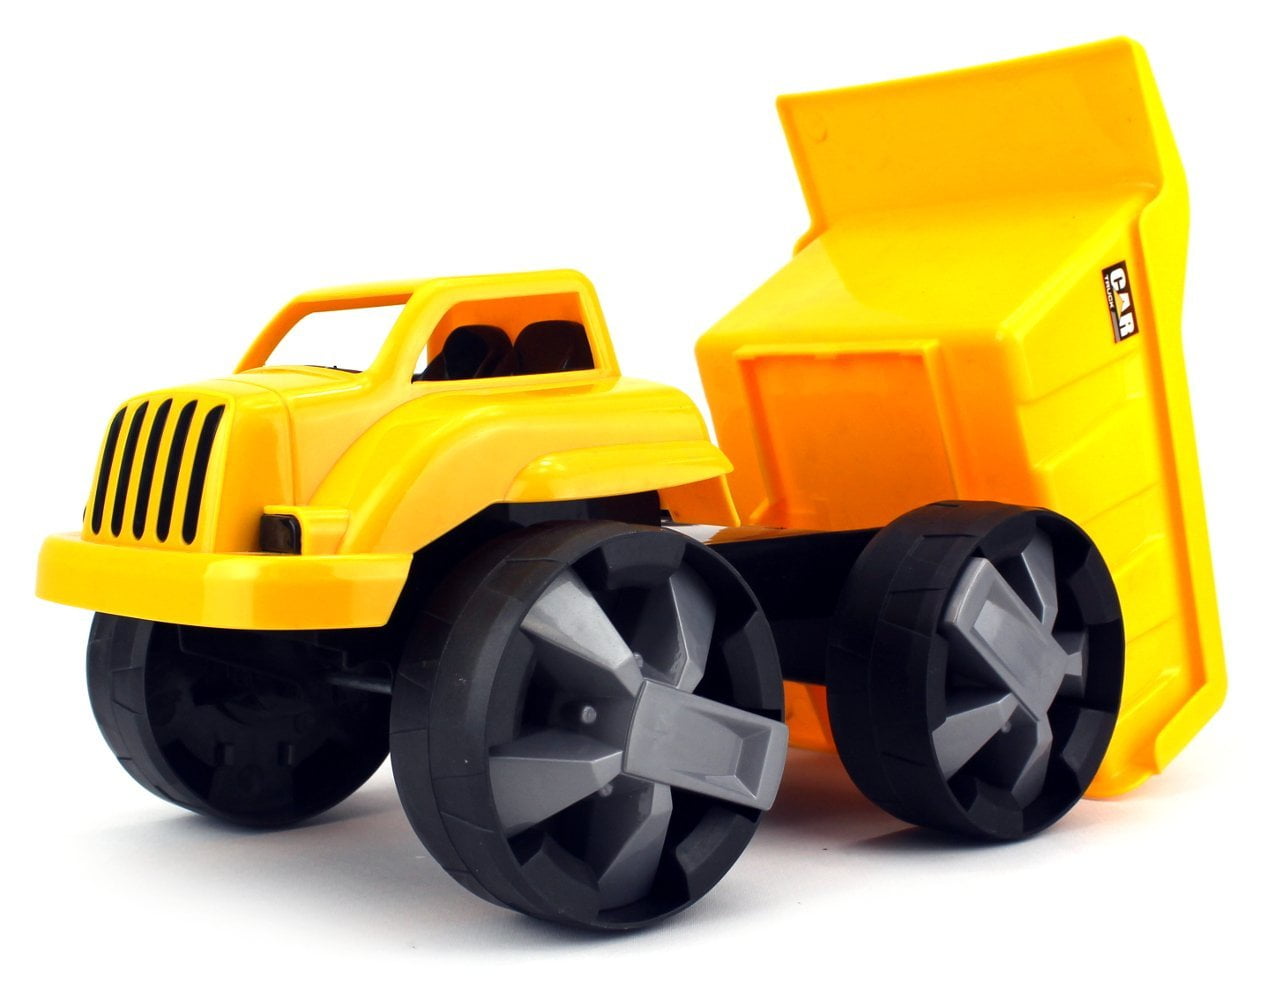 Details about   Toy Super Power Truck Construction Equipment Bulldozer Toy No 9109B 